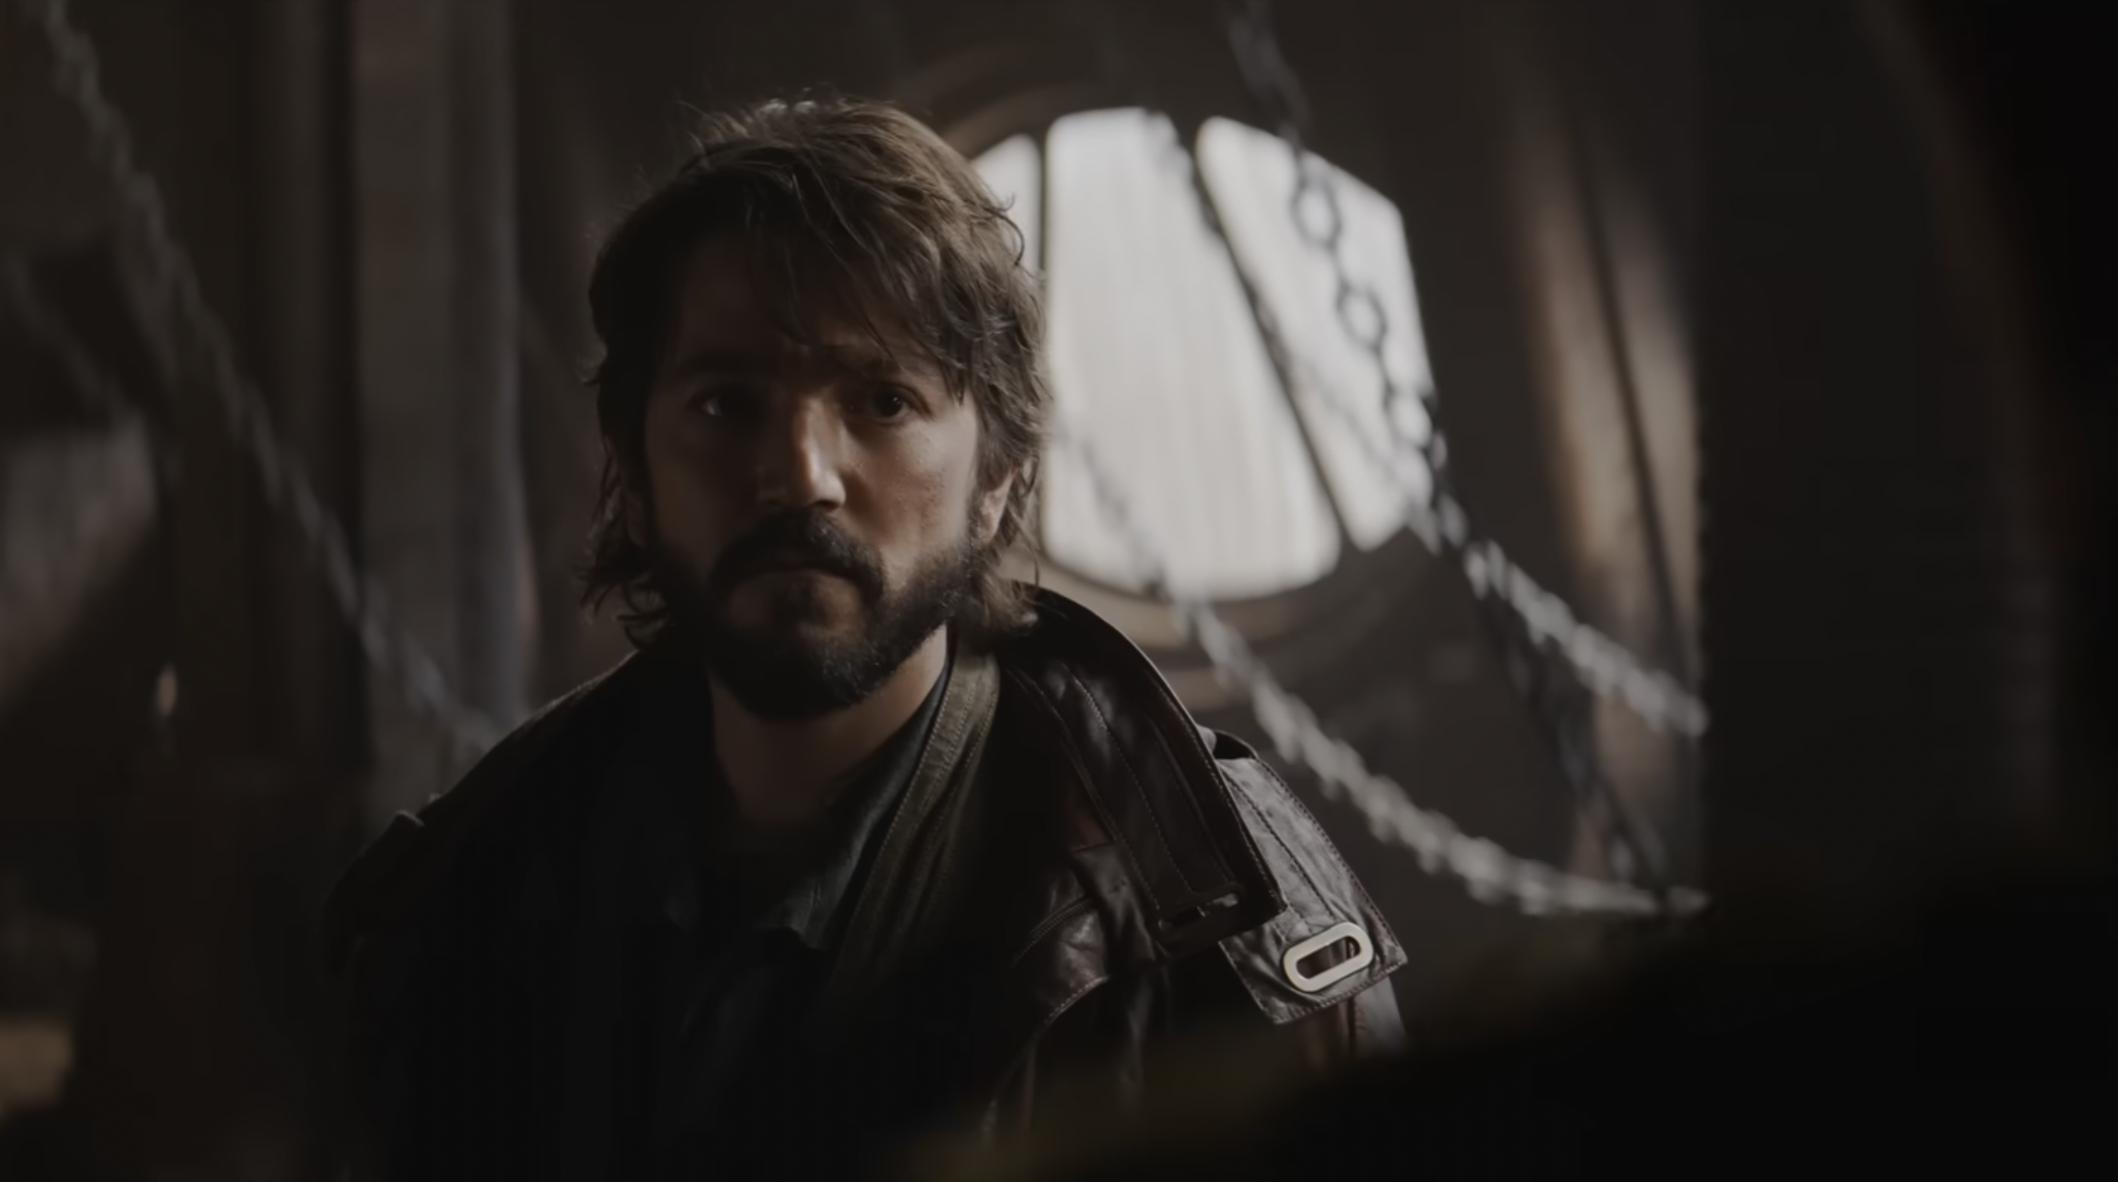 Andor creator explains the five-year story of the Rogue One